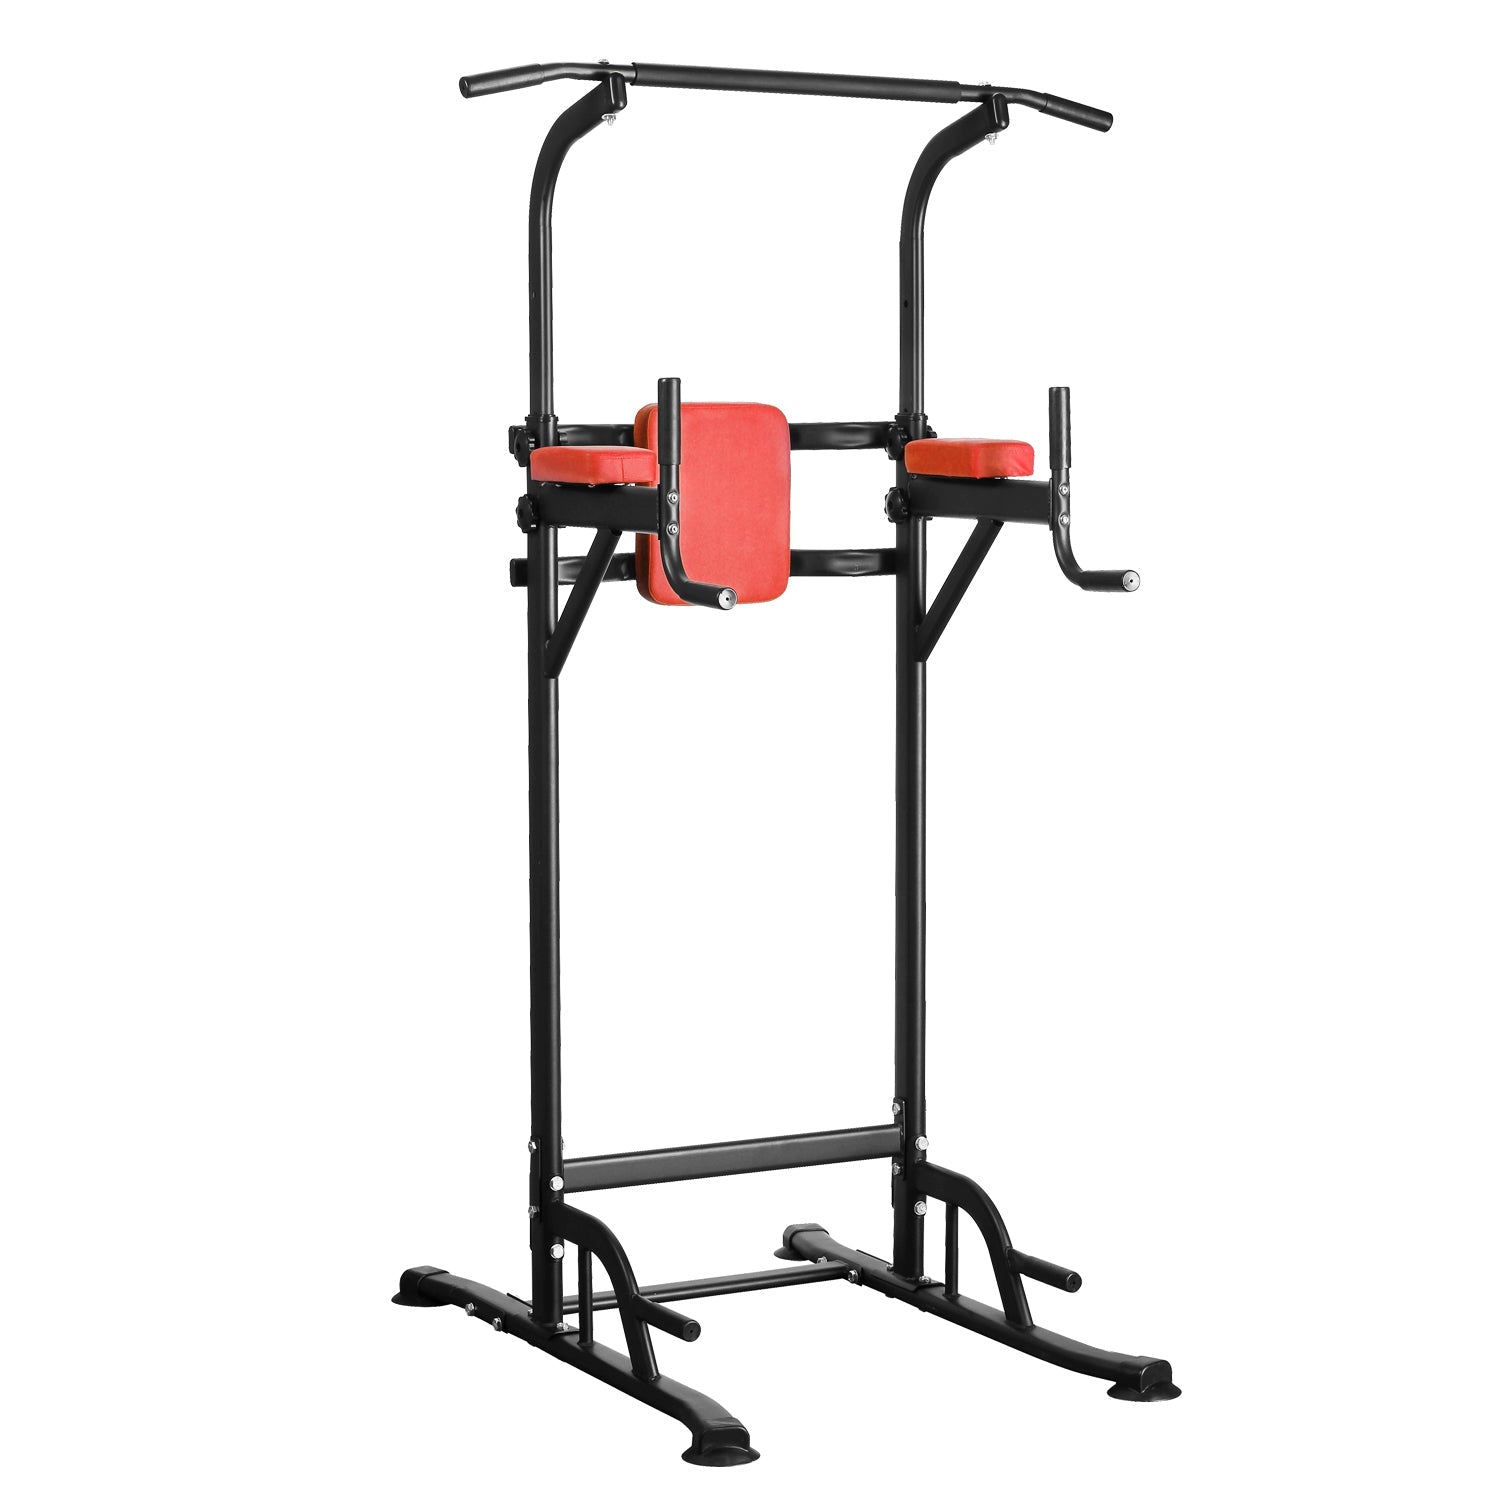 Power Tower Exercise Equioment Multi-Function Home Strength Training Tower Dip Stands Workout Station